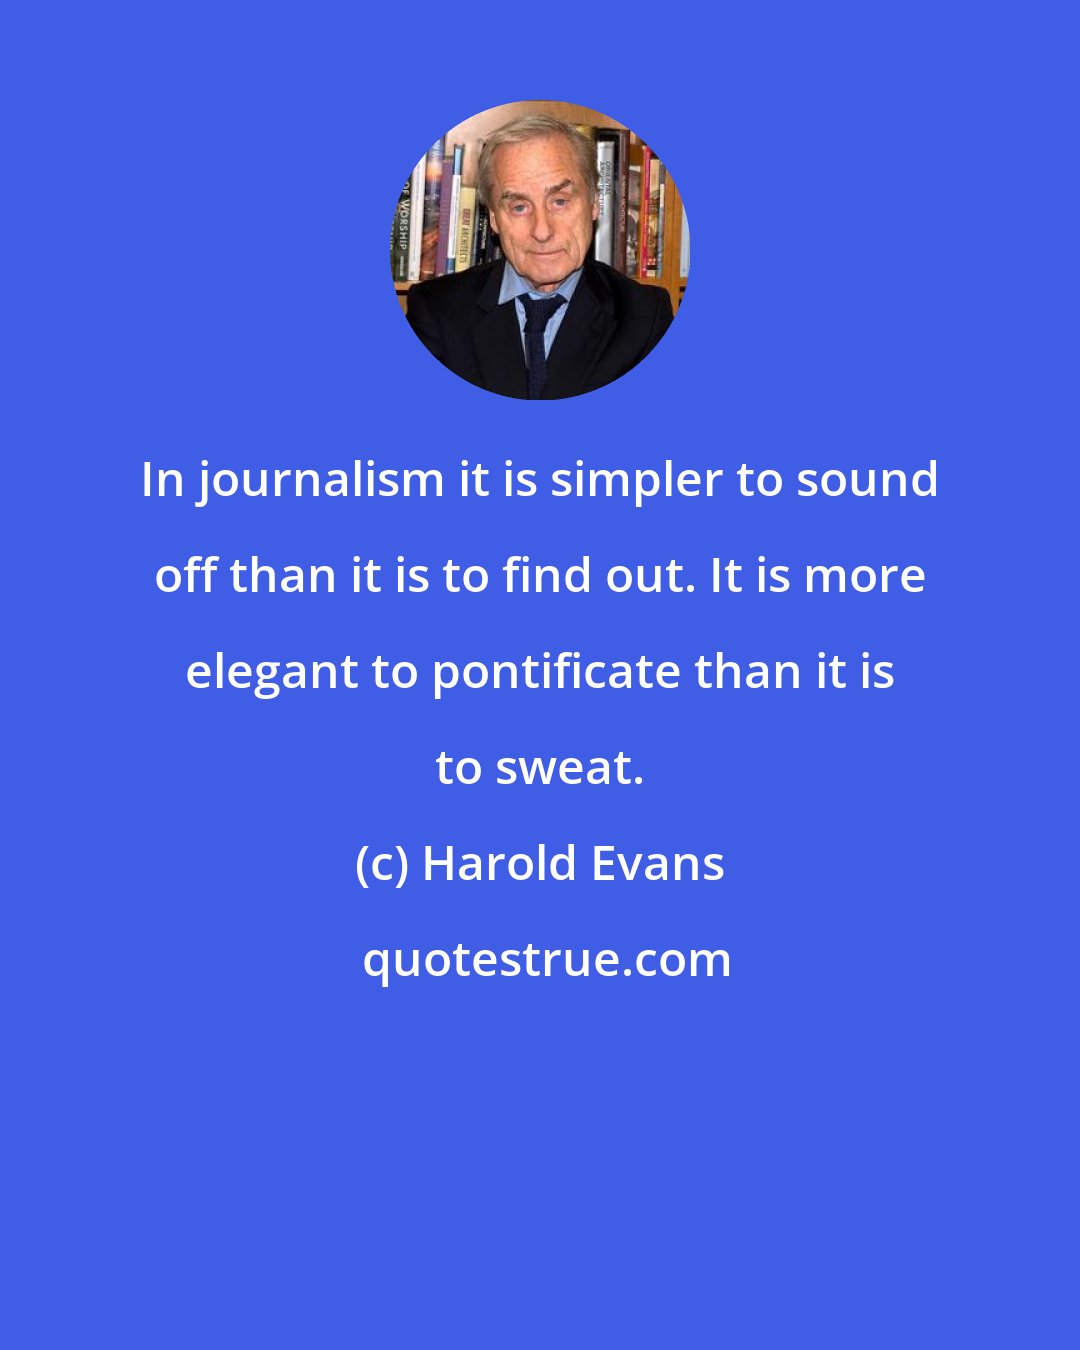 Harold Evans: In journalism it is simpler to sound off than it is to find out. It is more elegant to pontificate than it is to sweat.